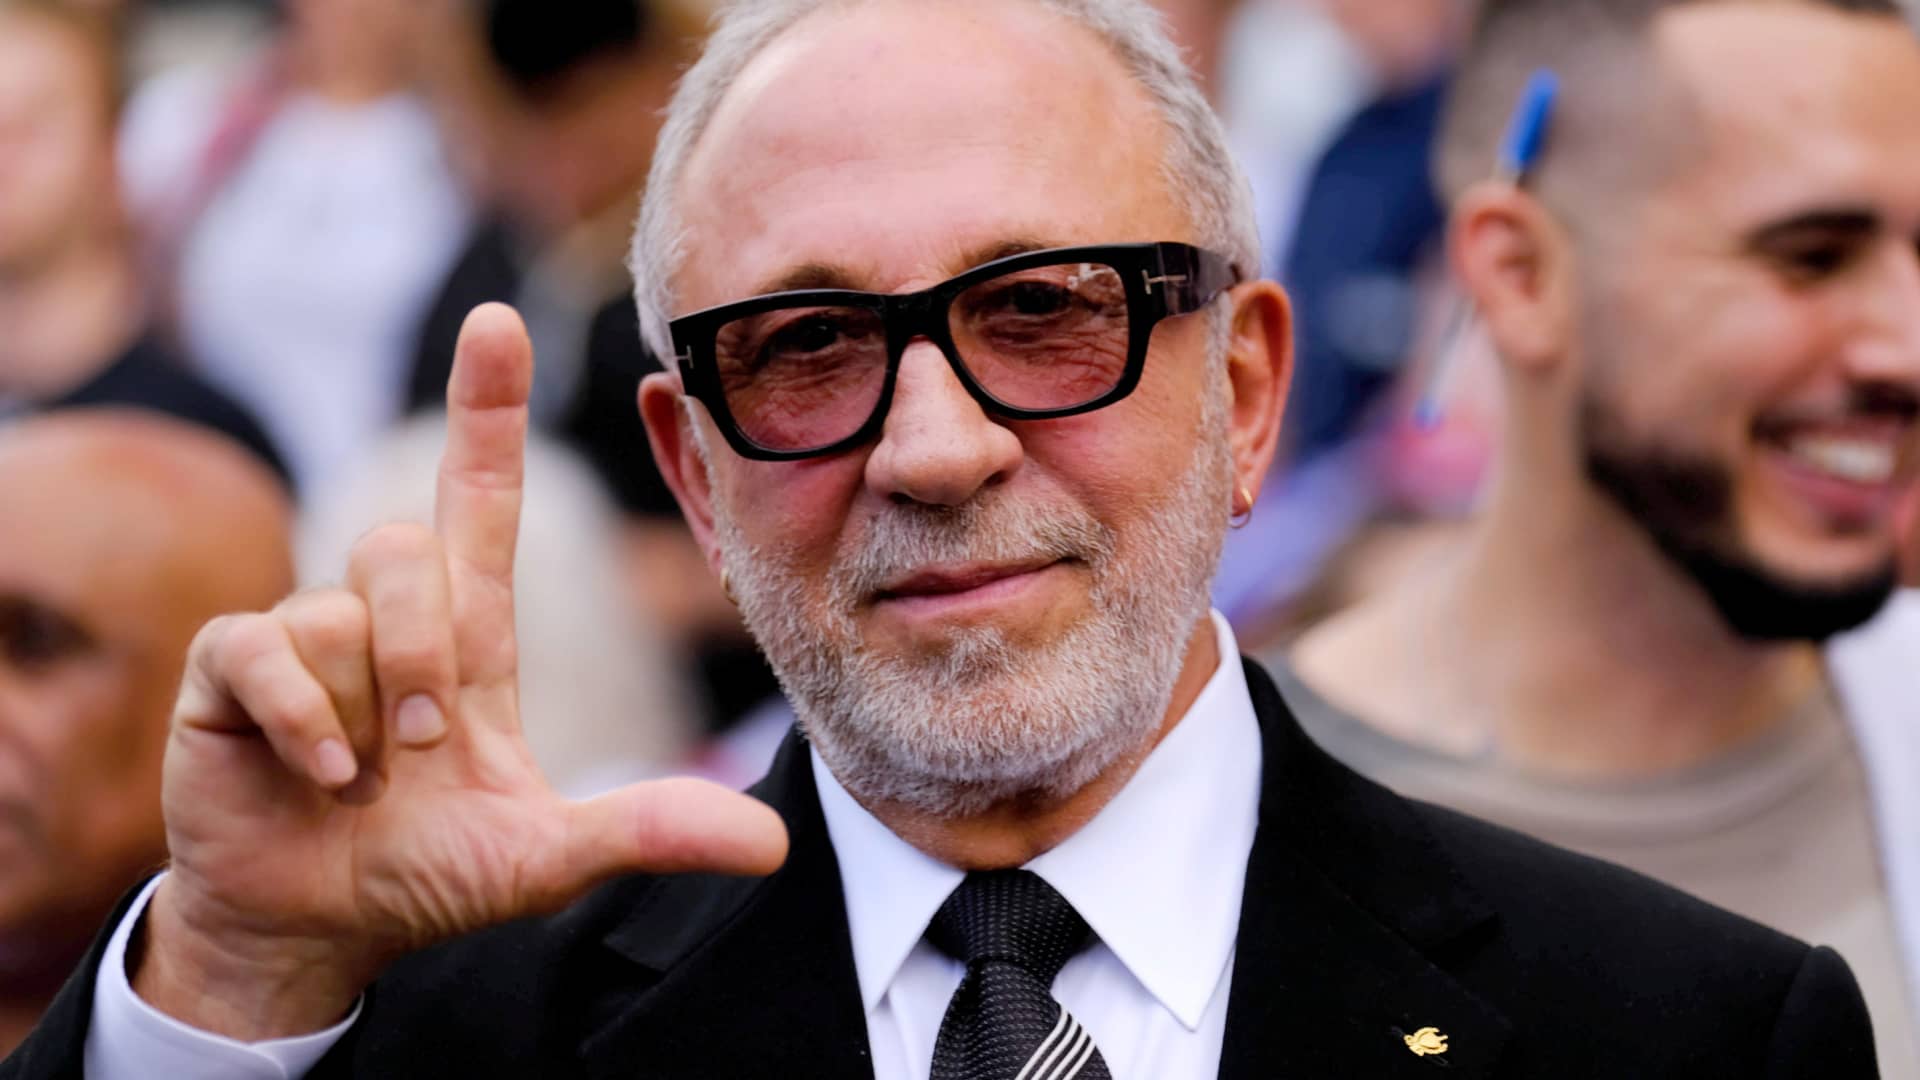 Emilio Estefan talks about the challenges of Latino representation in media